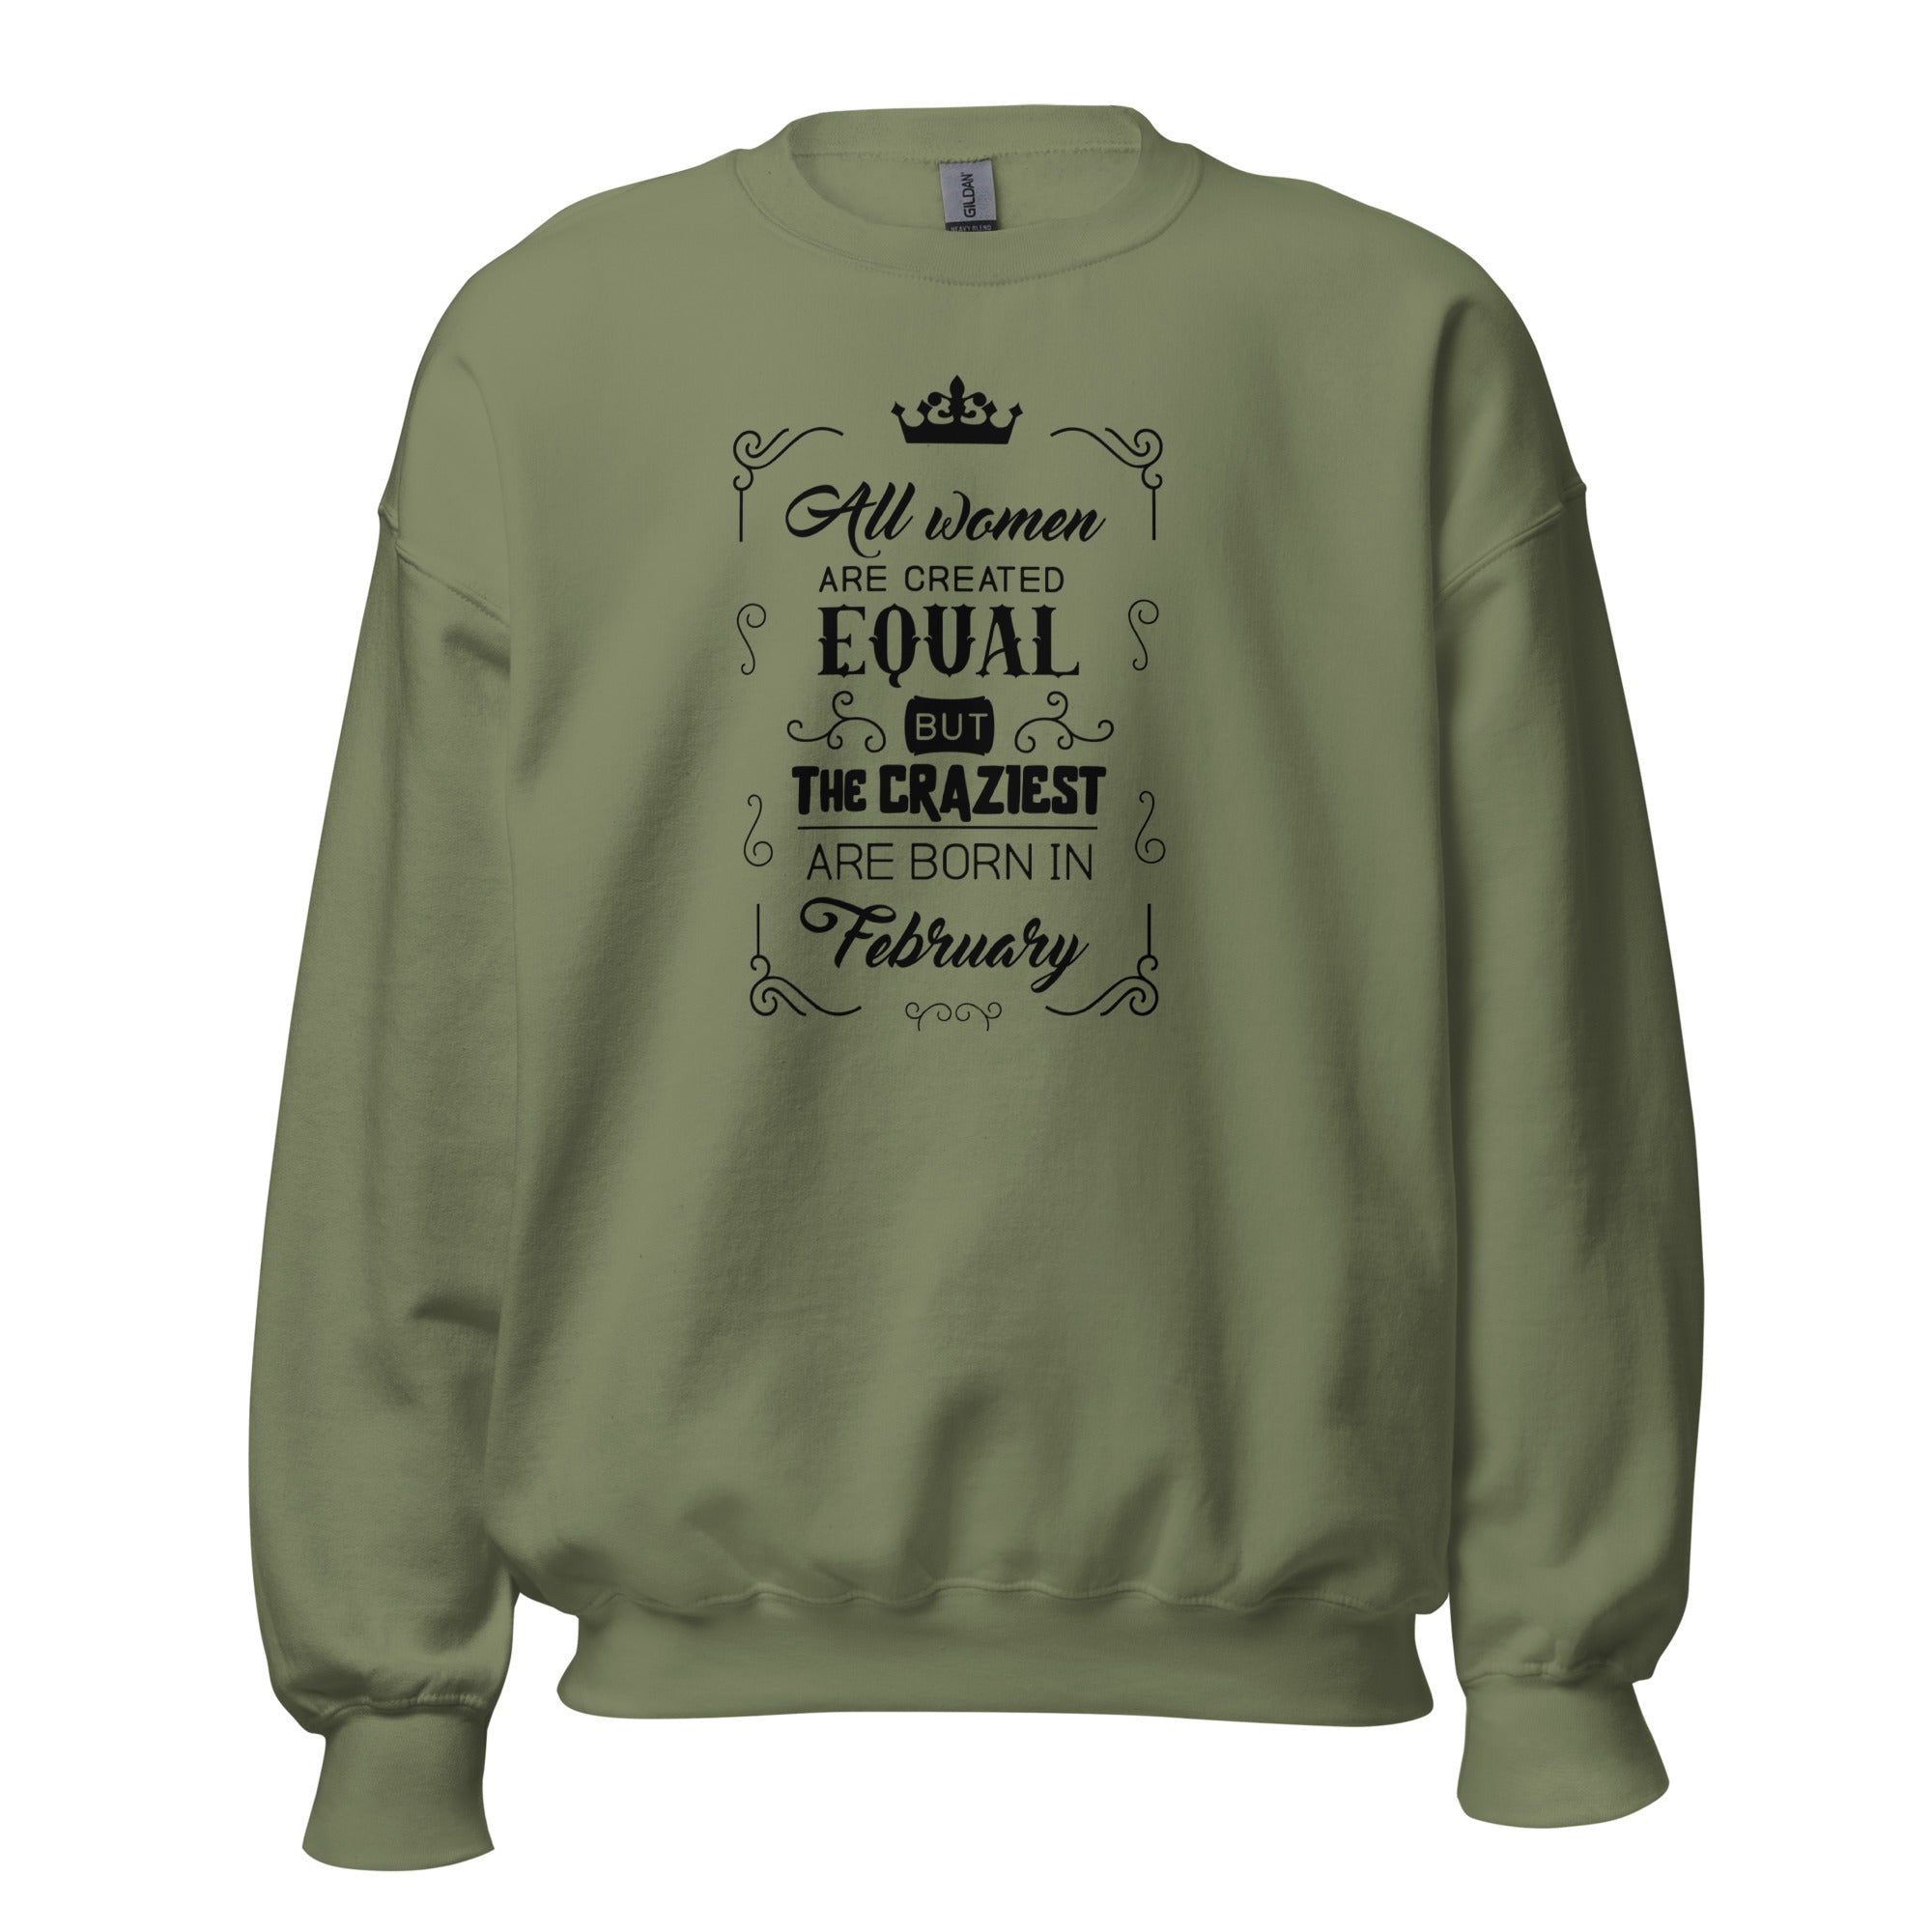 Women's Crew Neck Sweatshirt - All Women Are Created Equal But The Craziest Are Born In February - GRAPHIC T-SHIRTS